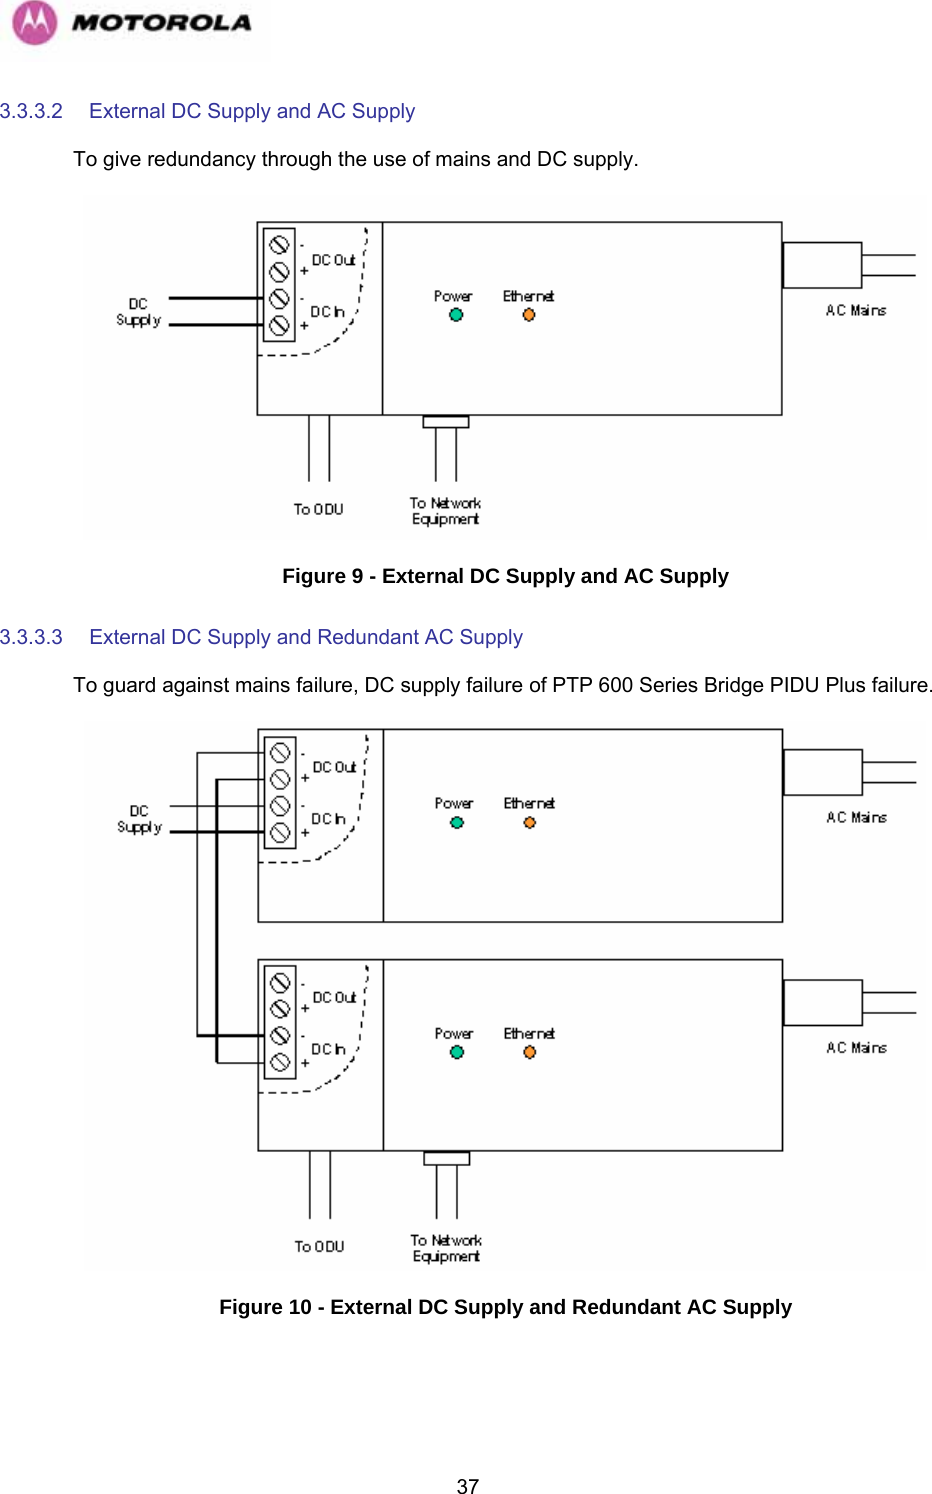   373.3.3.2  External DC Supply and AC Supply To give redundancy through the use of mains and DC supply.  Figure 9 - External DC Supply and AC Supply 3.3.3.3  External DC Supply and Redundant AC Supply To guard against mains failure, DC supply failure of PTP 600 Series Bridge PIDU Plus failure.  Figure 10 - External DC Supply and Redundant AC Supply 